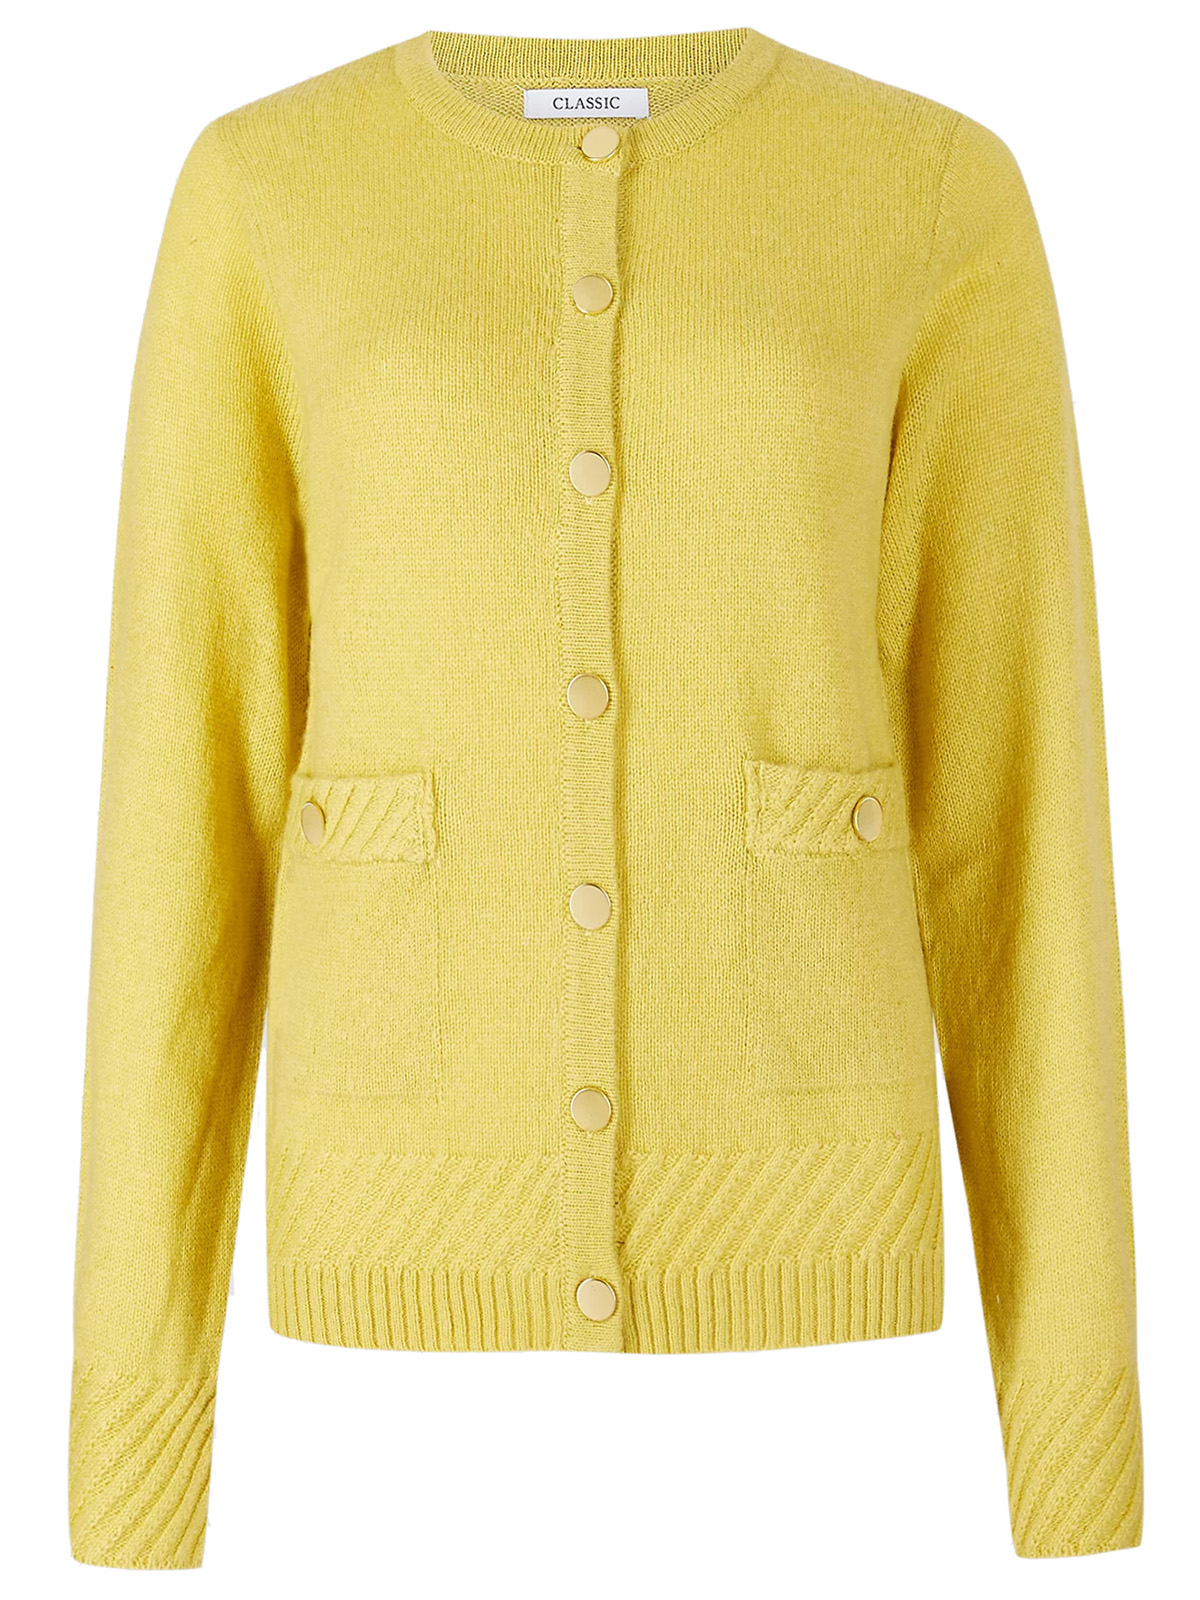 Marks and Spencer - - M&5 LIME Lambswool Blend Textured Cardigan - Size ...